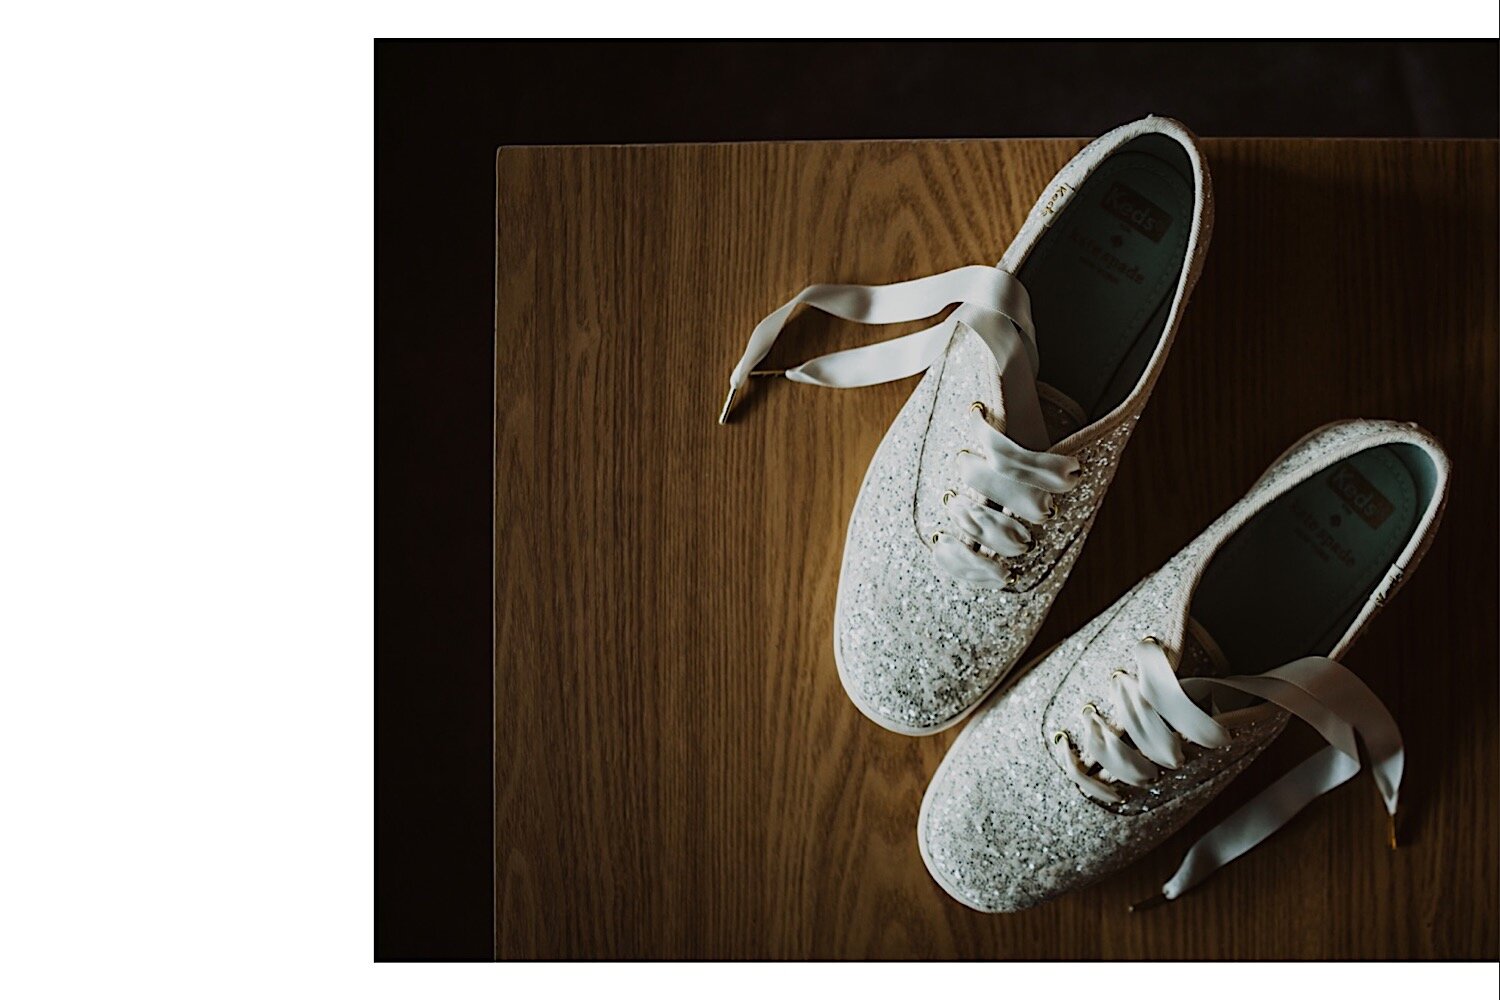 015_TWS-26_bride_trainers_ready_sequins_photography_henley_oxfordshire_millitary_details_bridalprep_shoes_crooked_wedding_getting_groom_winter_billet.jpg